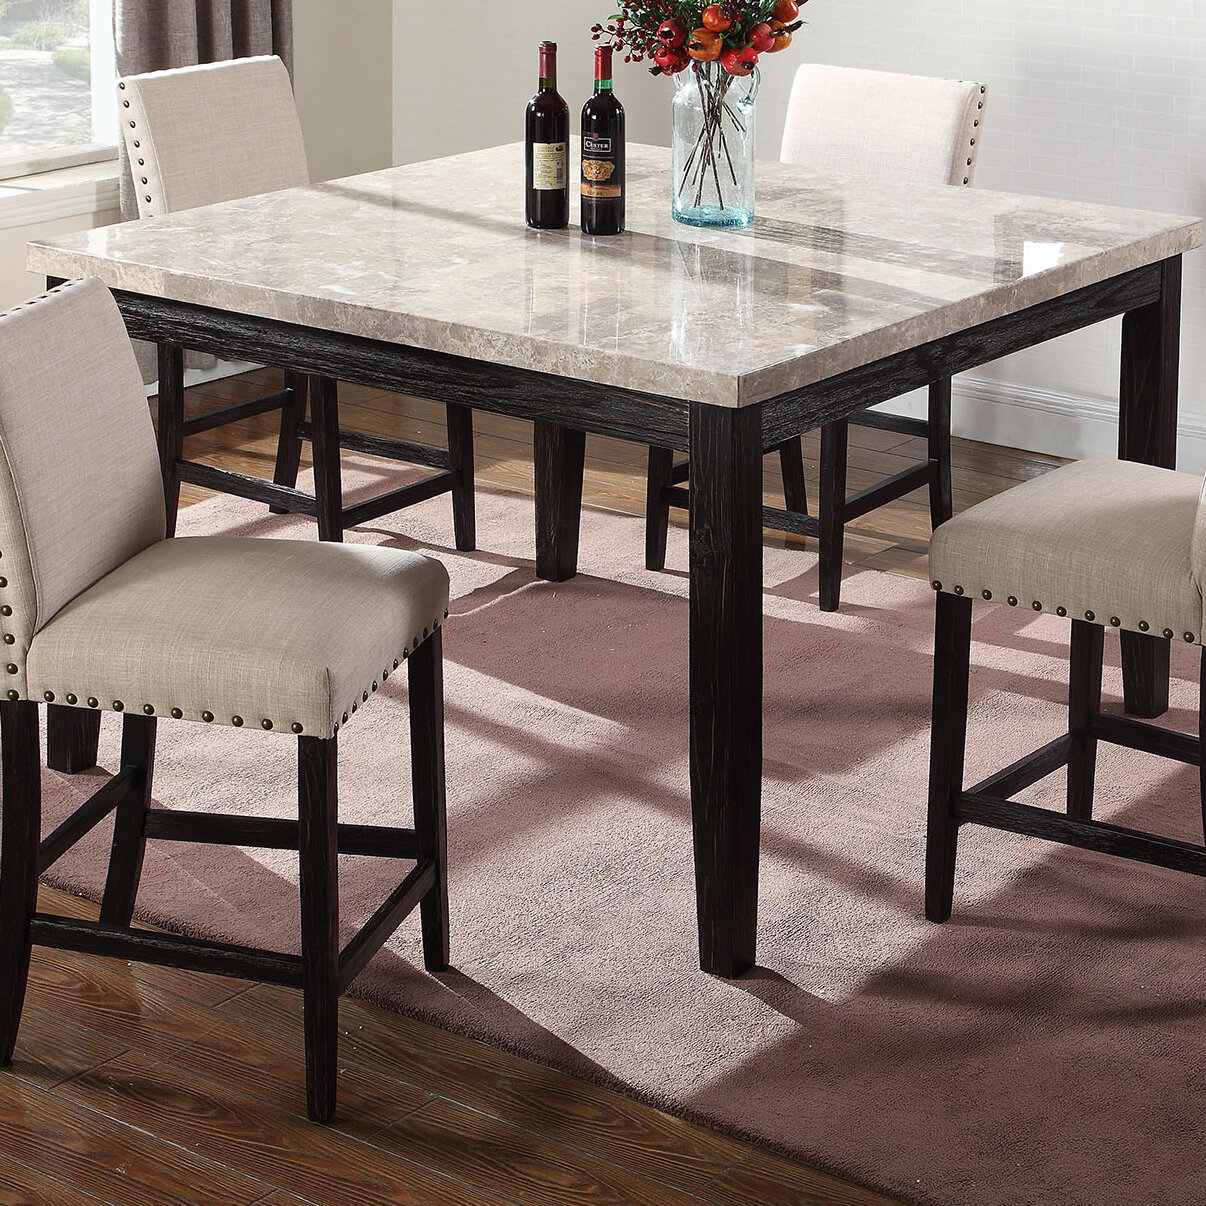 Alcott Hill Wilber Marble Counter Height Dining Table Reviews Wayfair